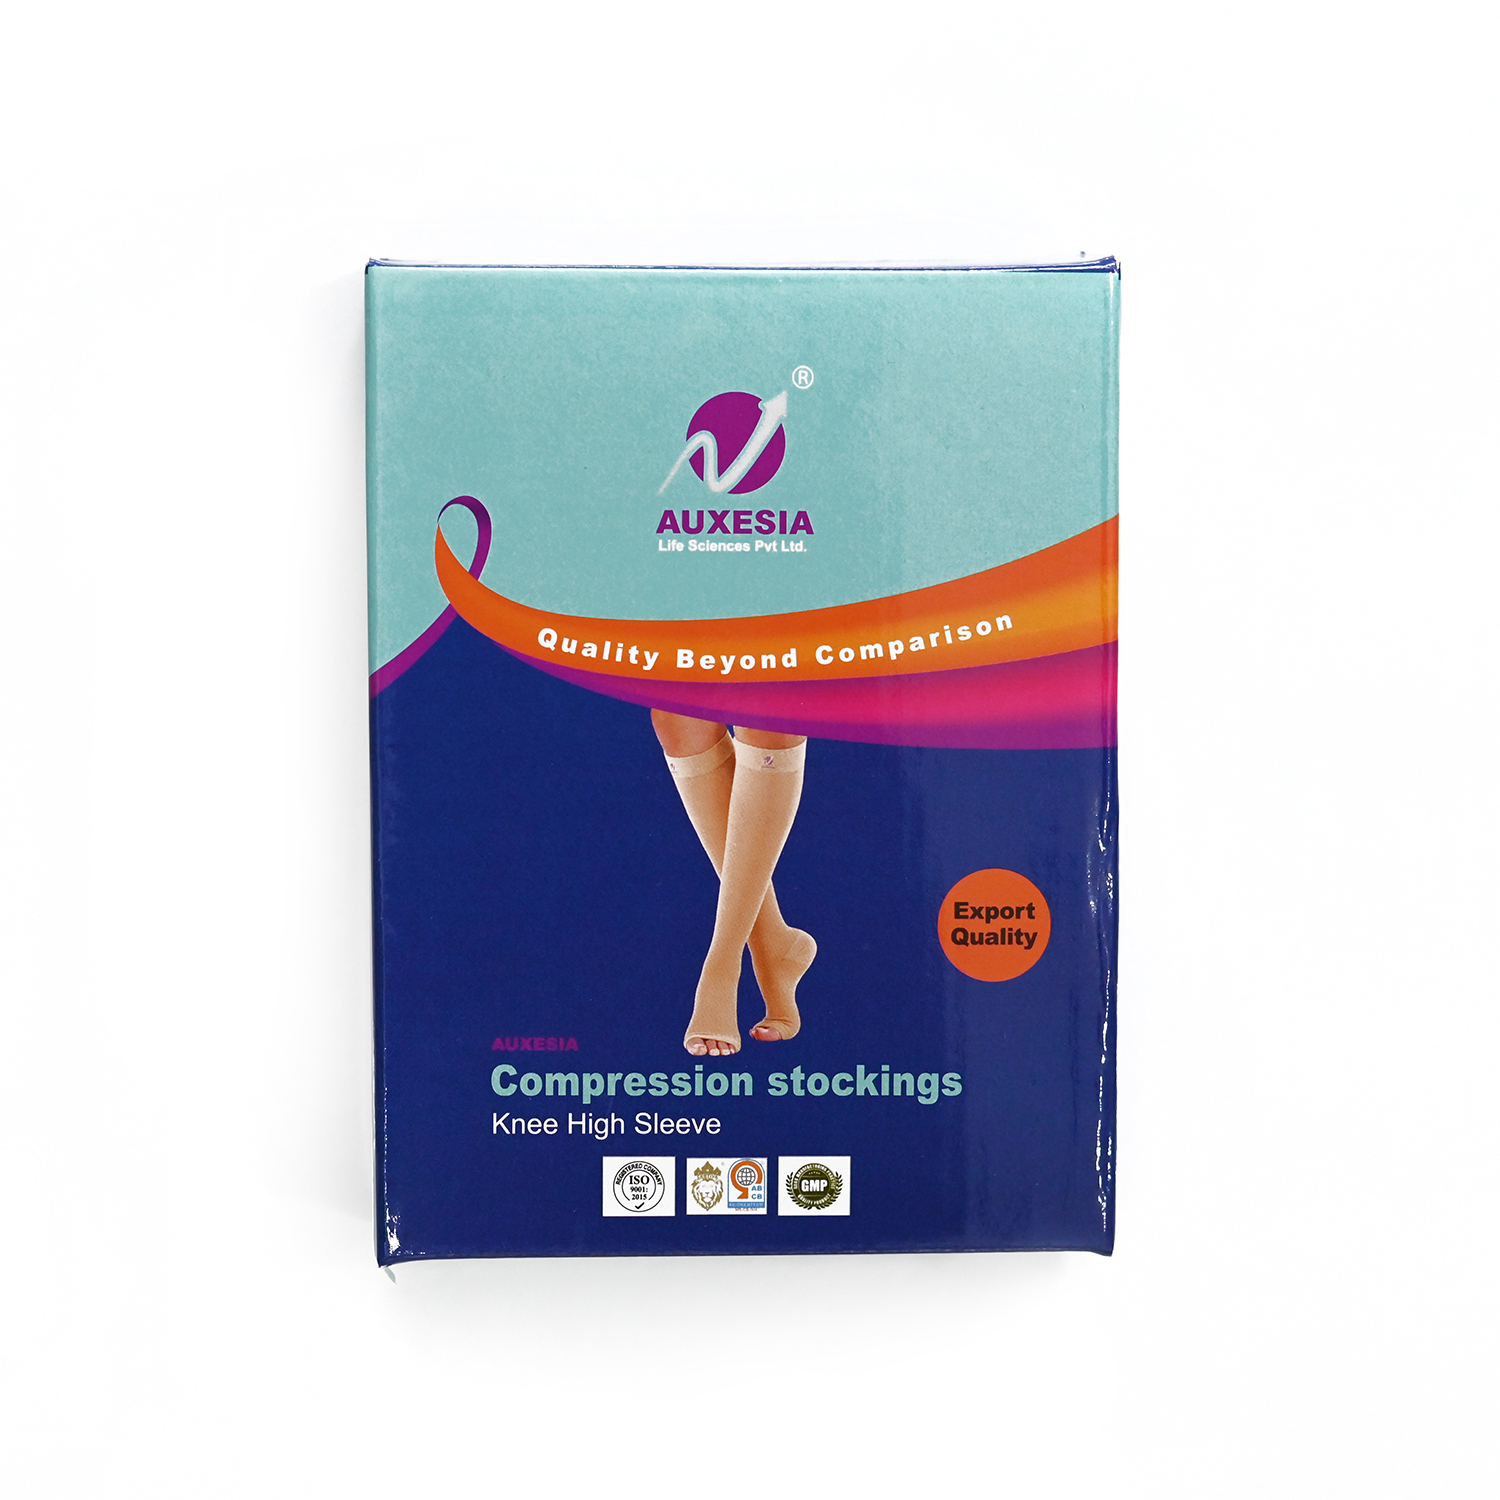 Knee High Sleeve Compression Stockings